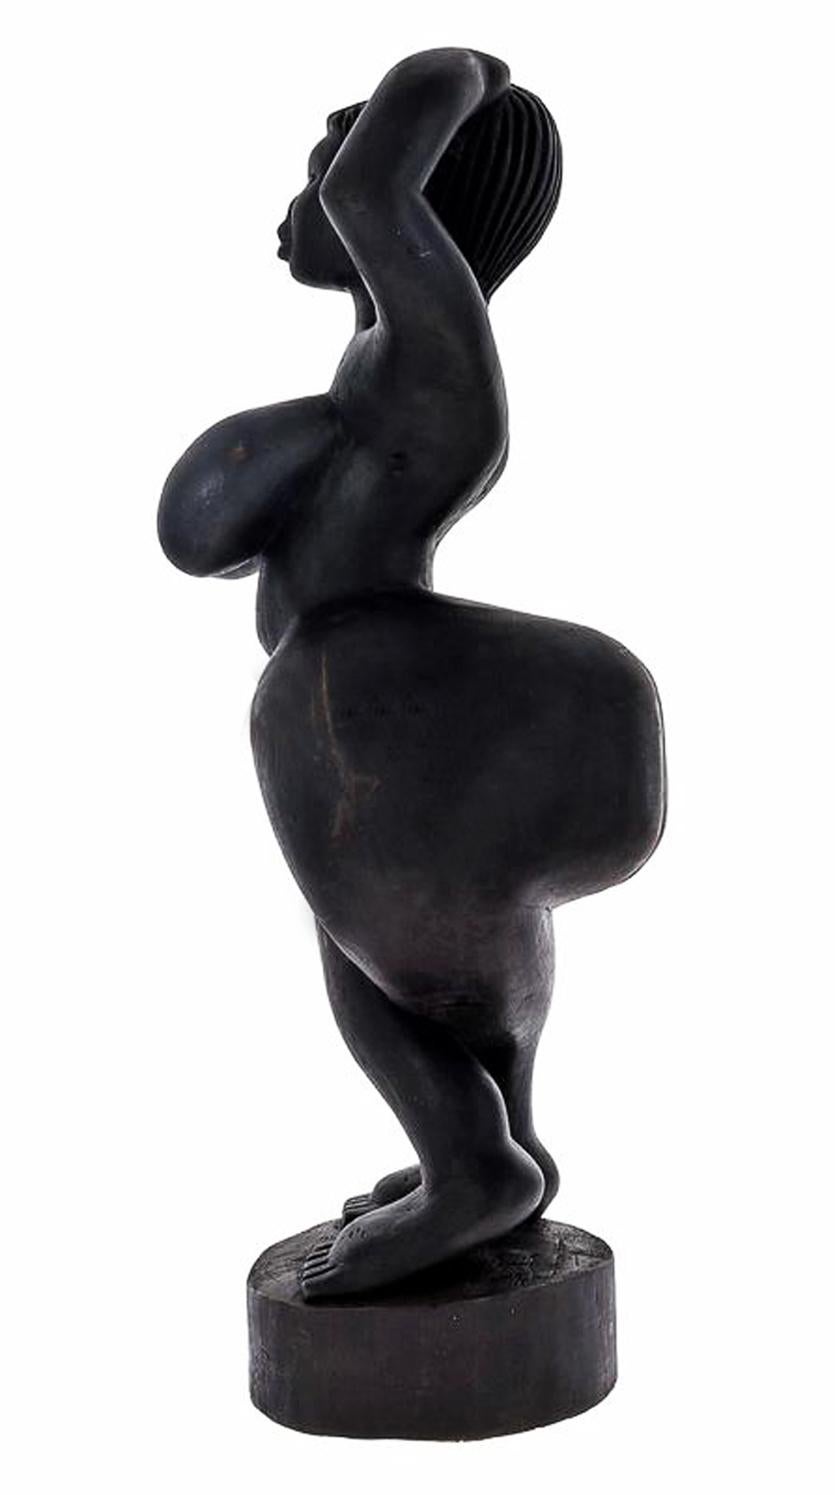 Beautiful large African Art Female Figure Decade of 50. In carved ebonized wood, representing female figure with hyperbolic characteristics.

Private collection.